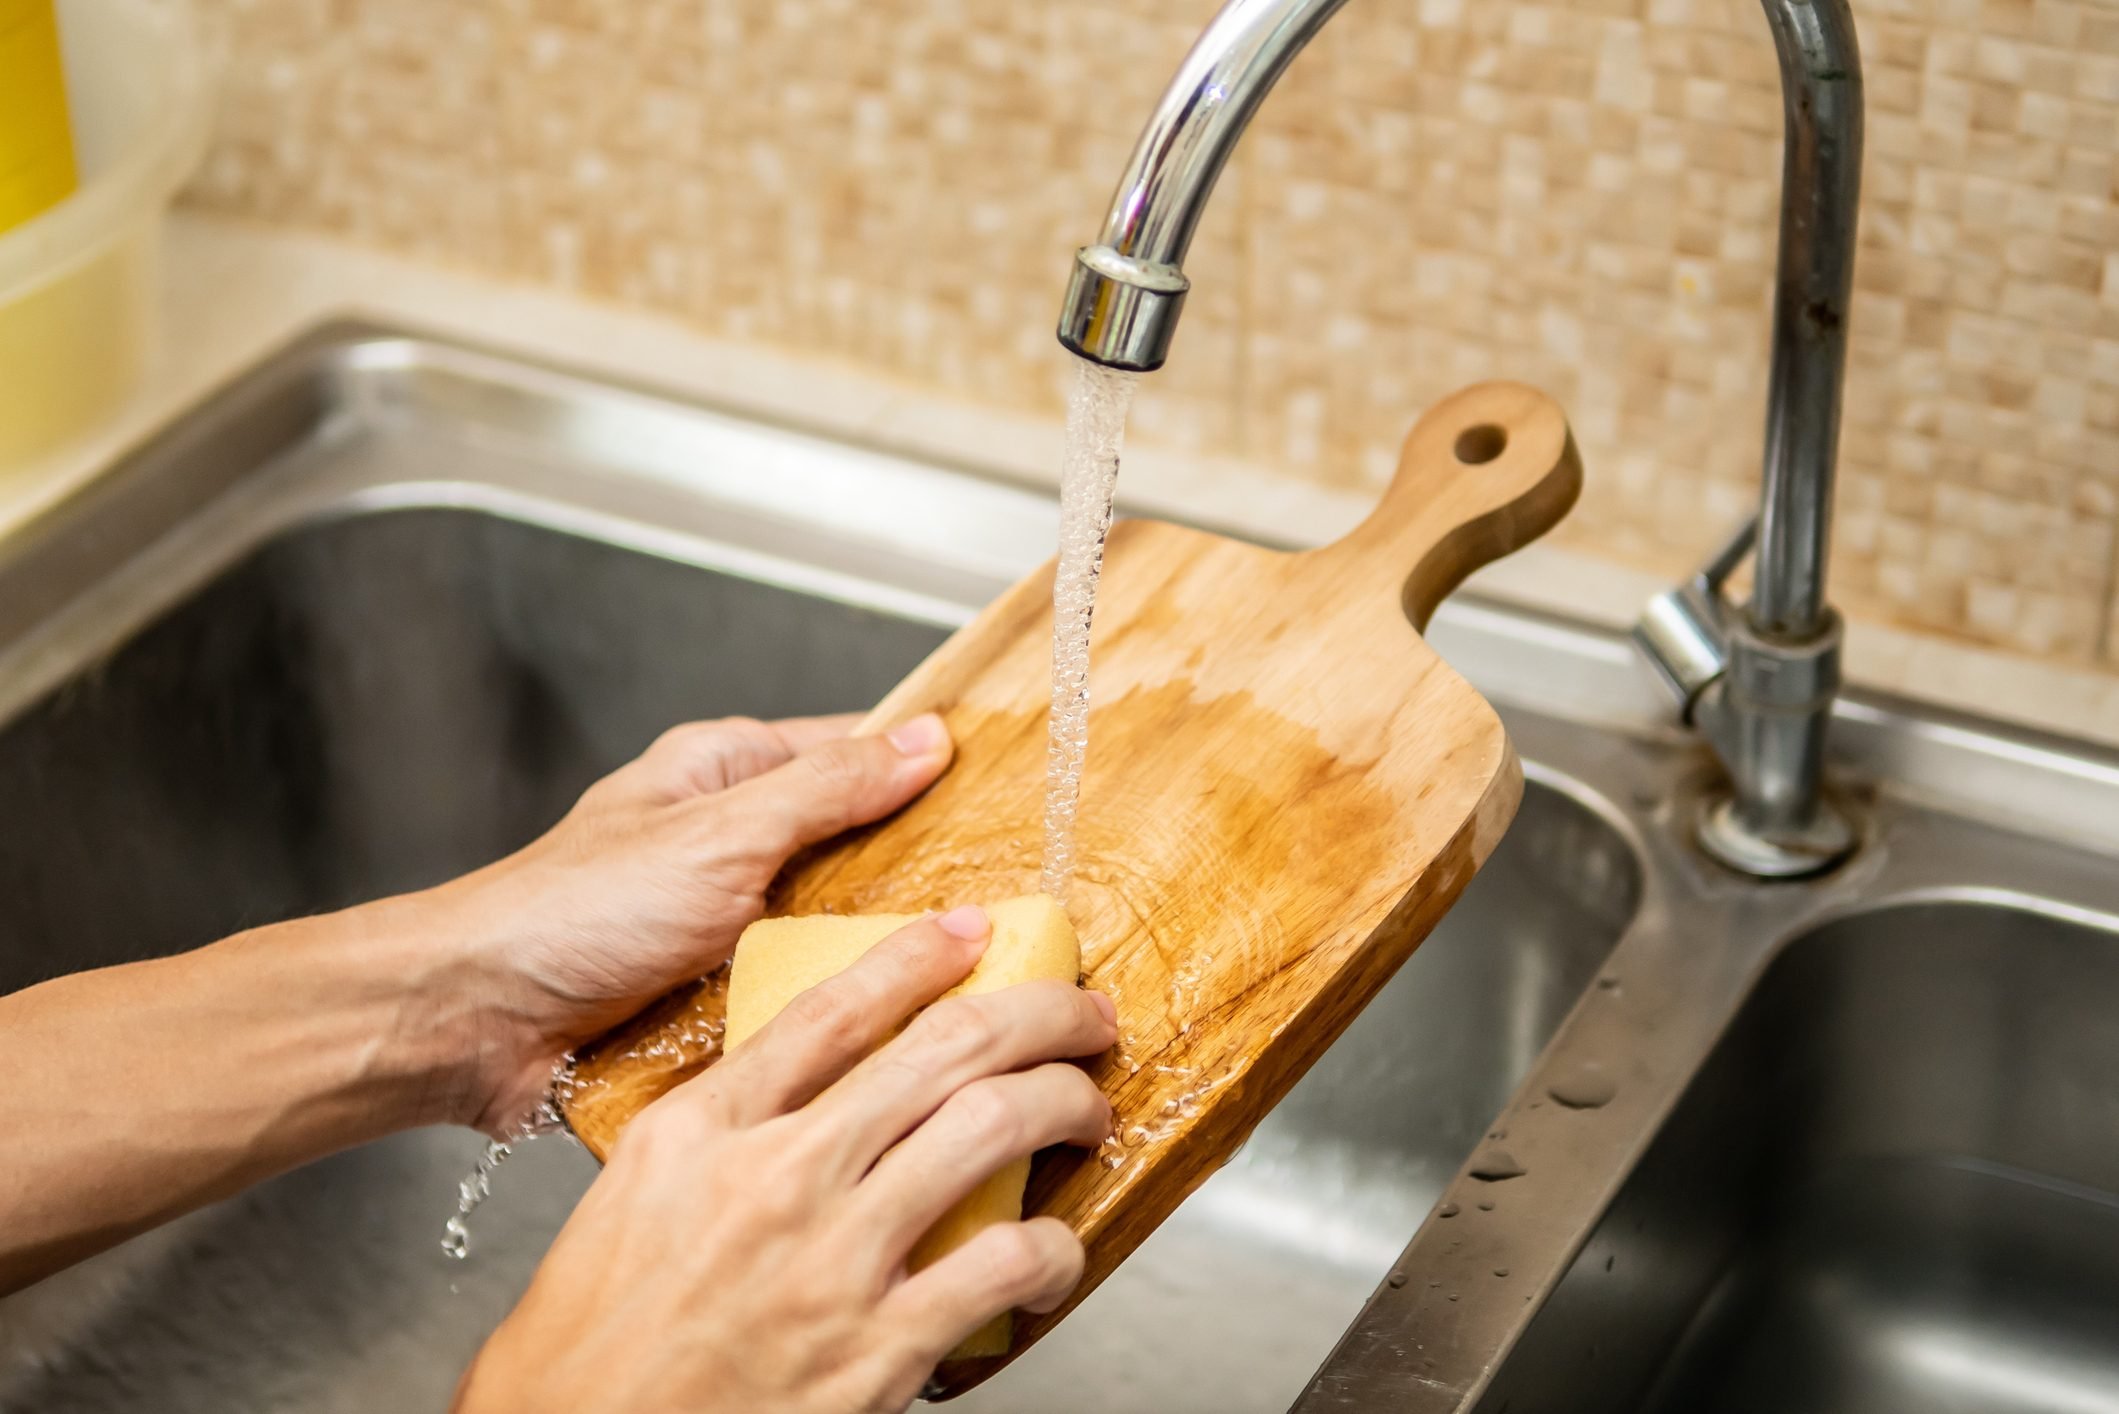  Everyday Kitchen Bamboo Cutting Board - A Cut Above the  Rest!